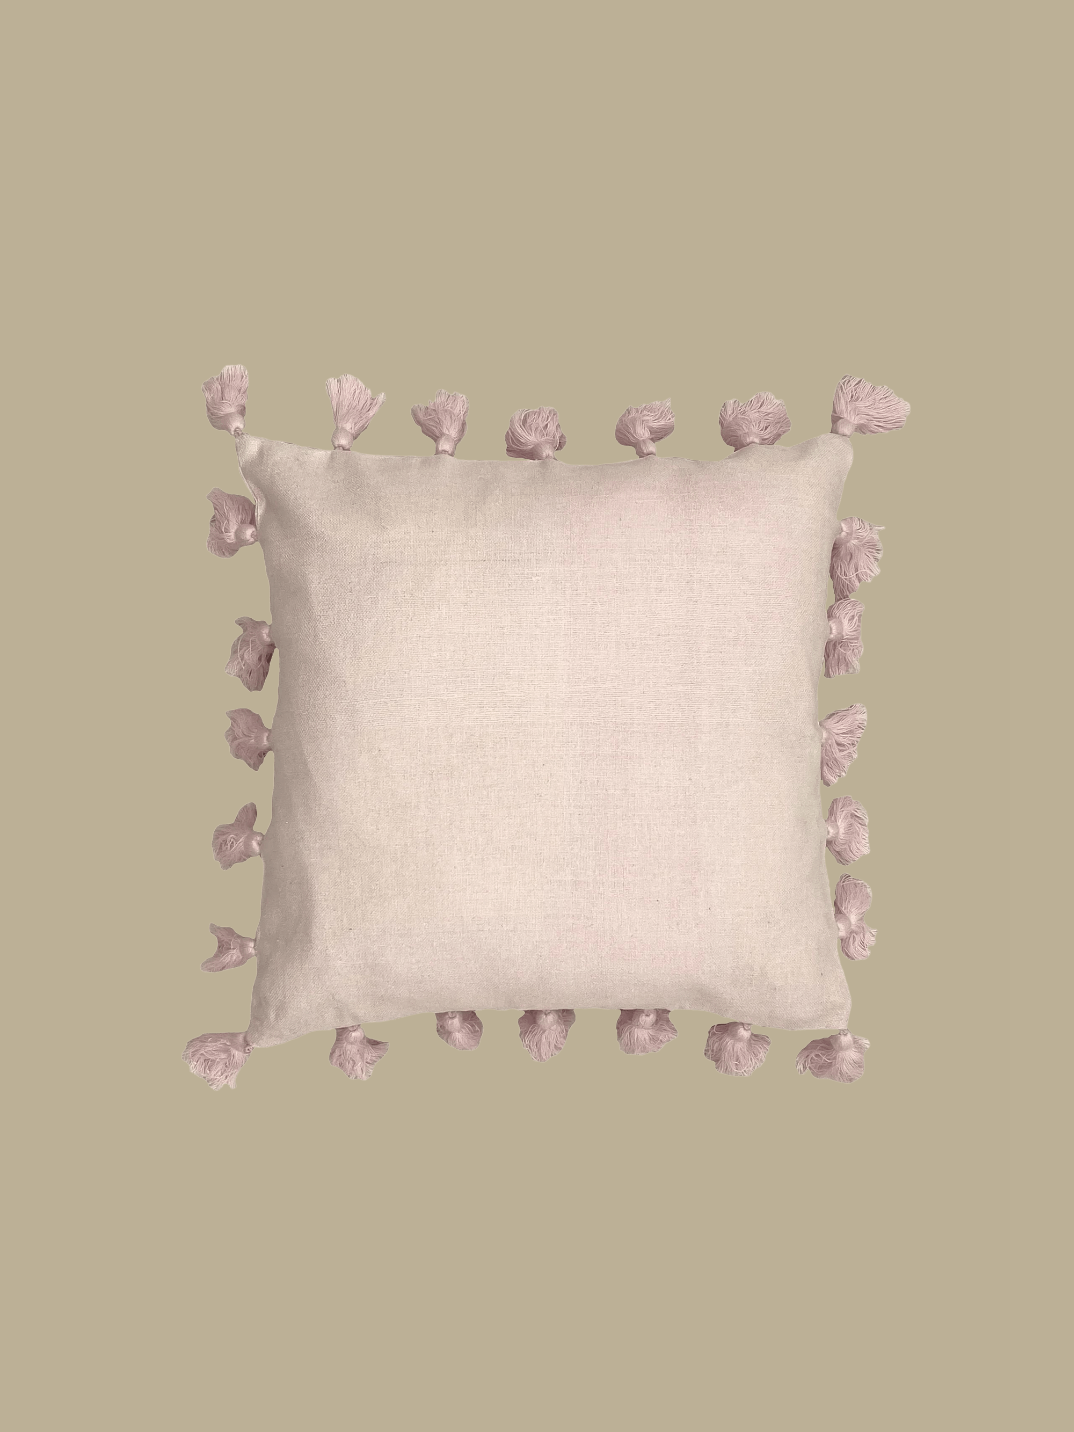 Casa Luna eco-friendly women-owned sustainable home goods made in India soft pink tassel slub throw pillow cushion